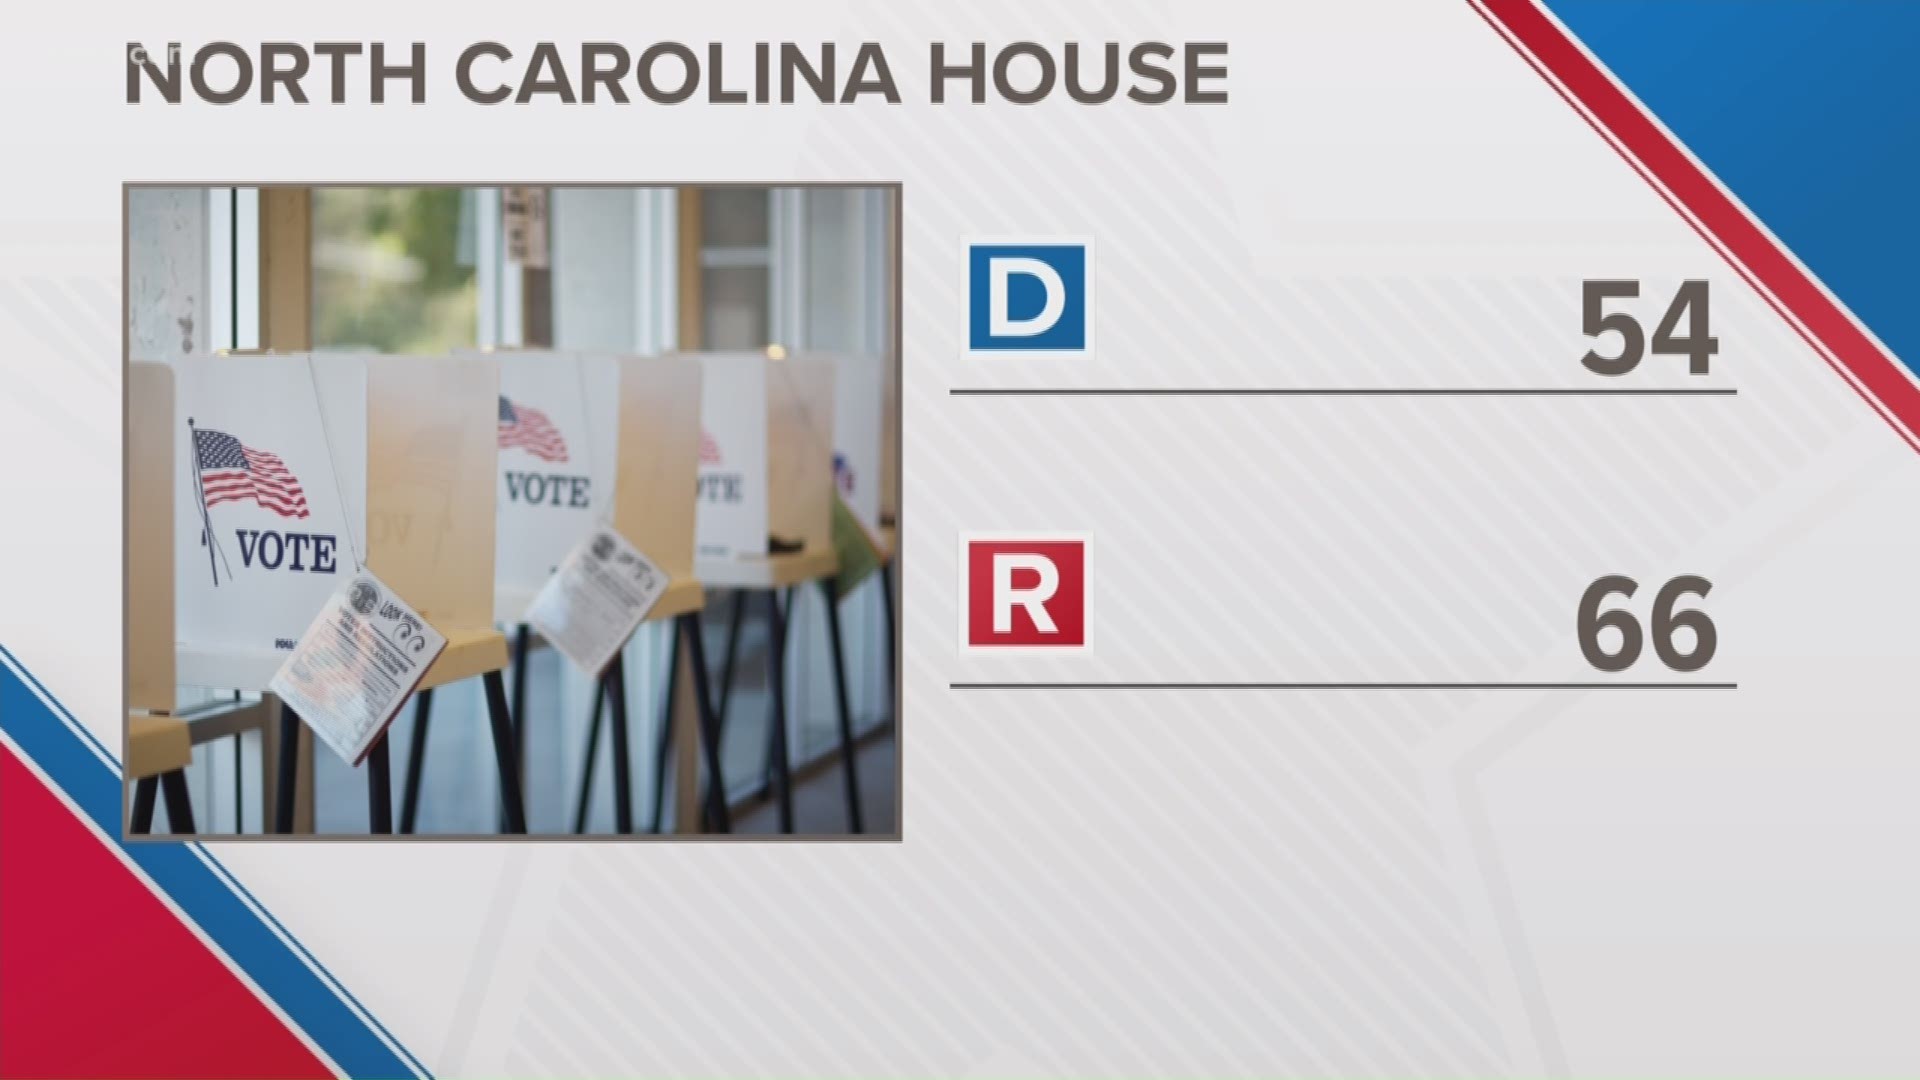 Enough Democrats won races to eliminate the Republican supermajority in the North Carolina House and Senate.